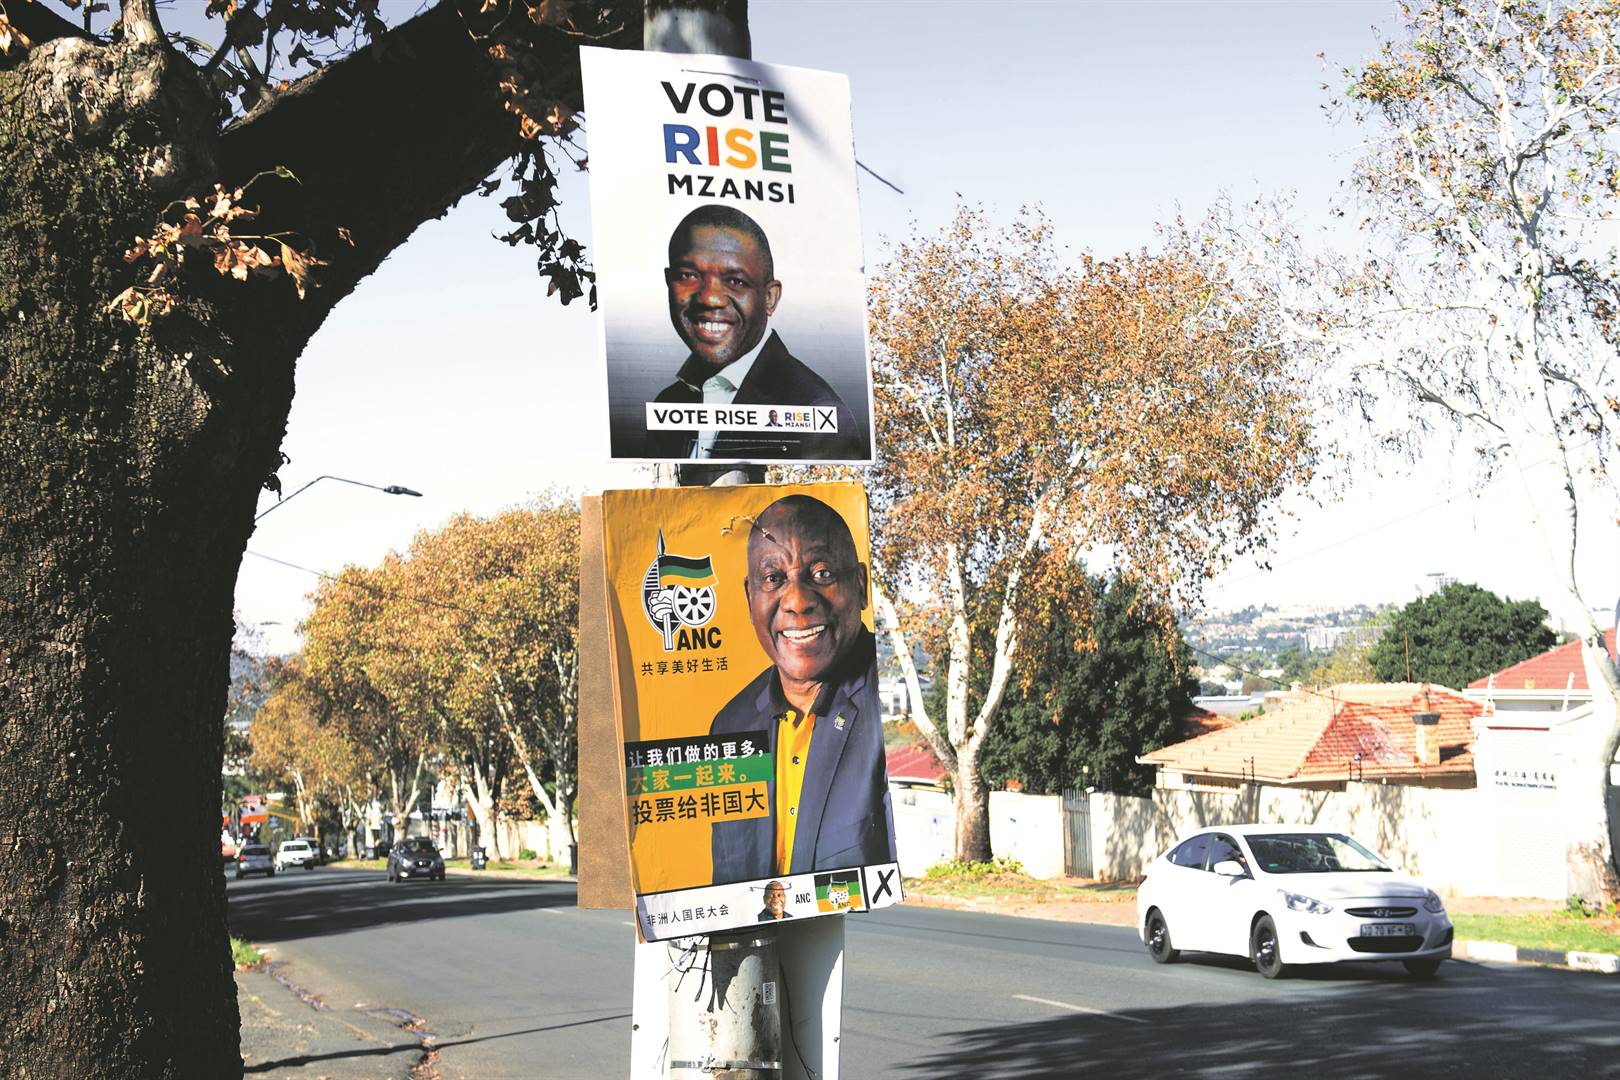 News24 | ANC sees nationwide surge in polls amid challenges in KZN, Gauteng